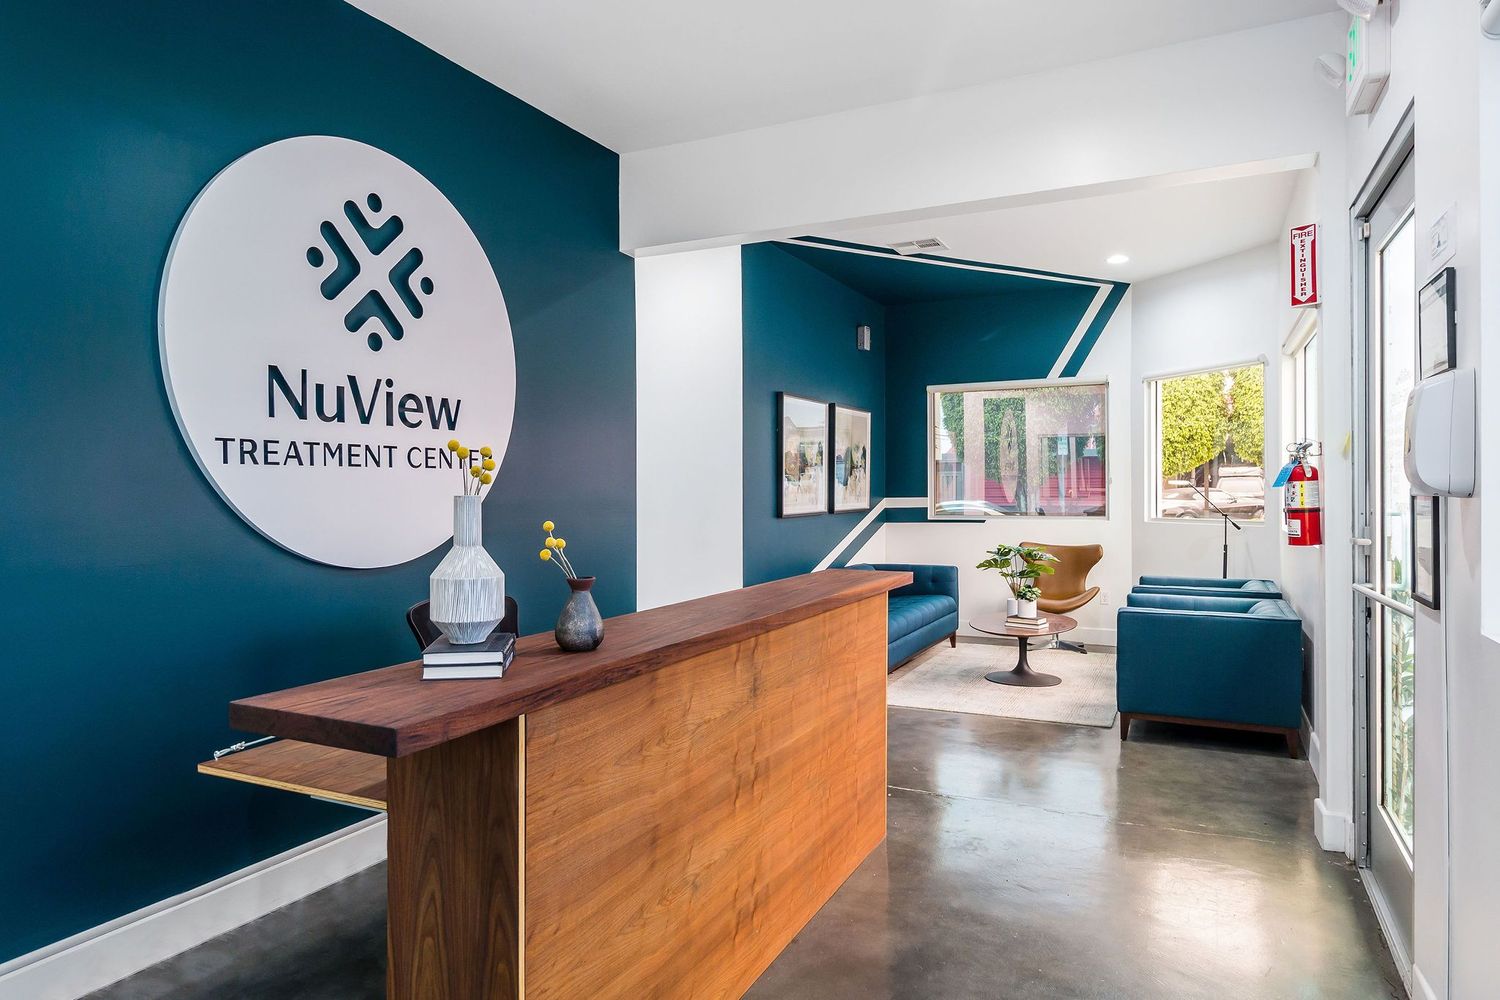 Gallery Photo of NuView Treatment Center's front desk